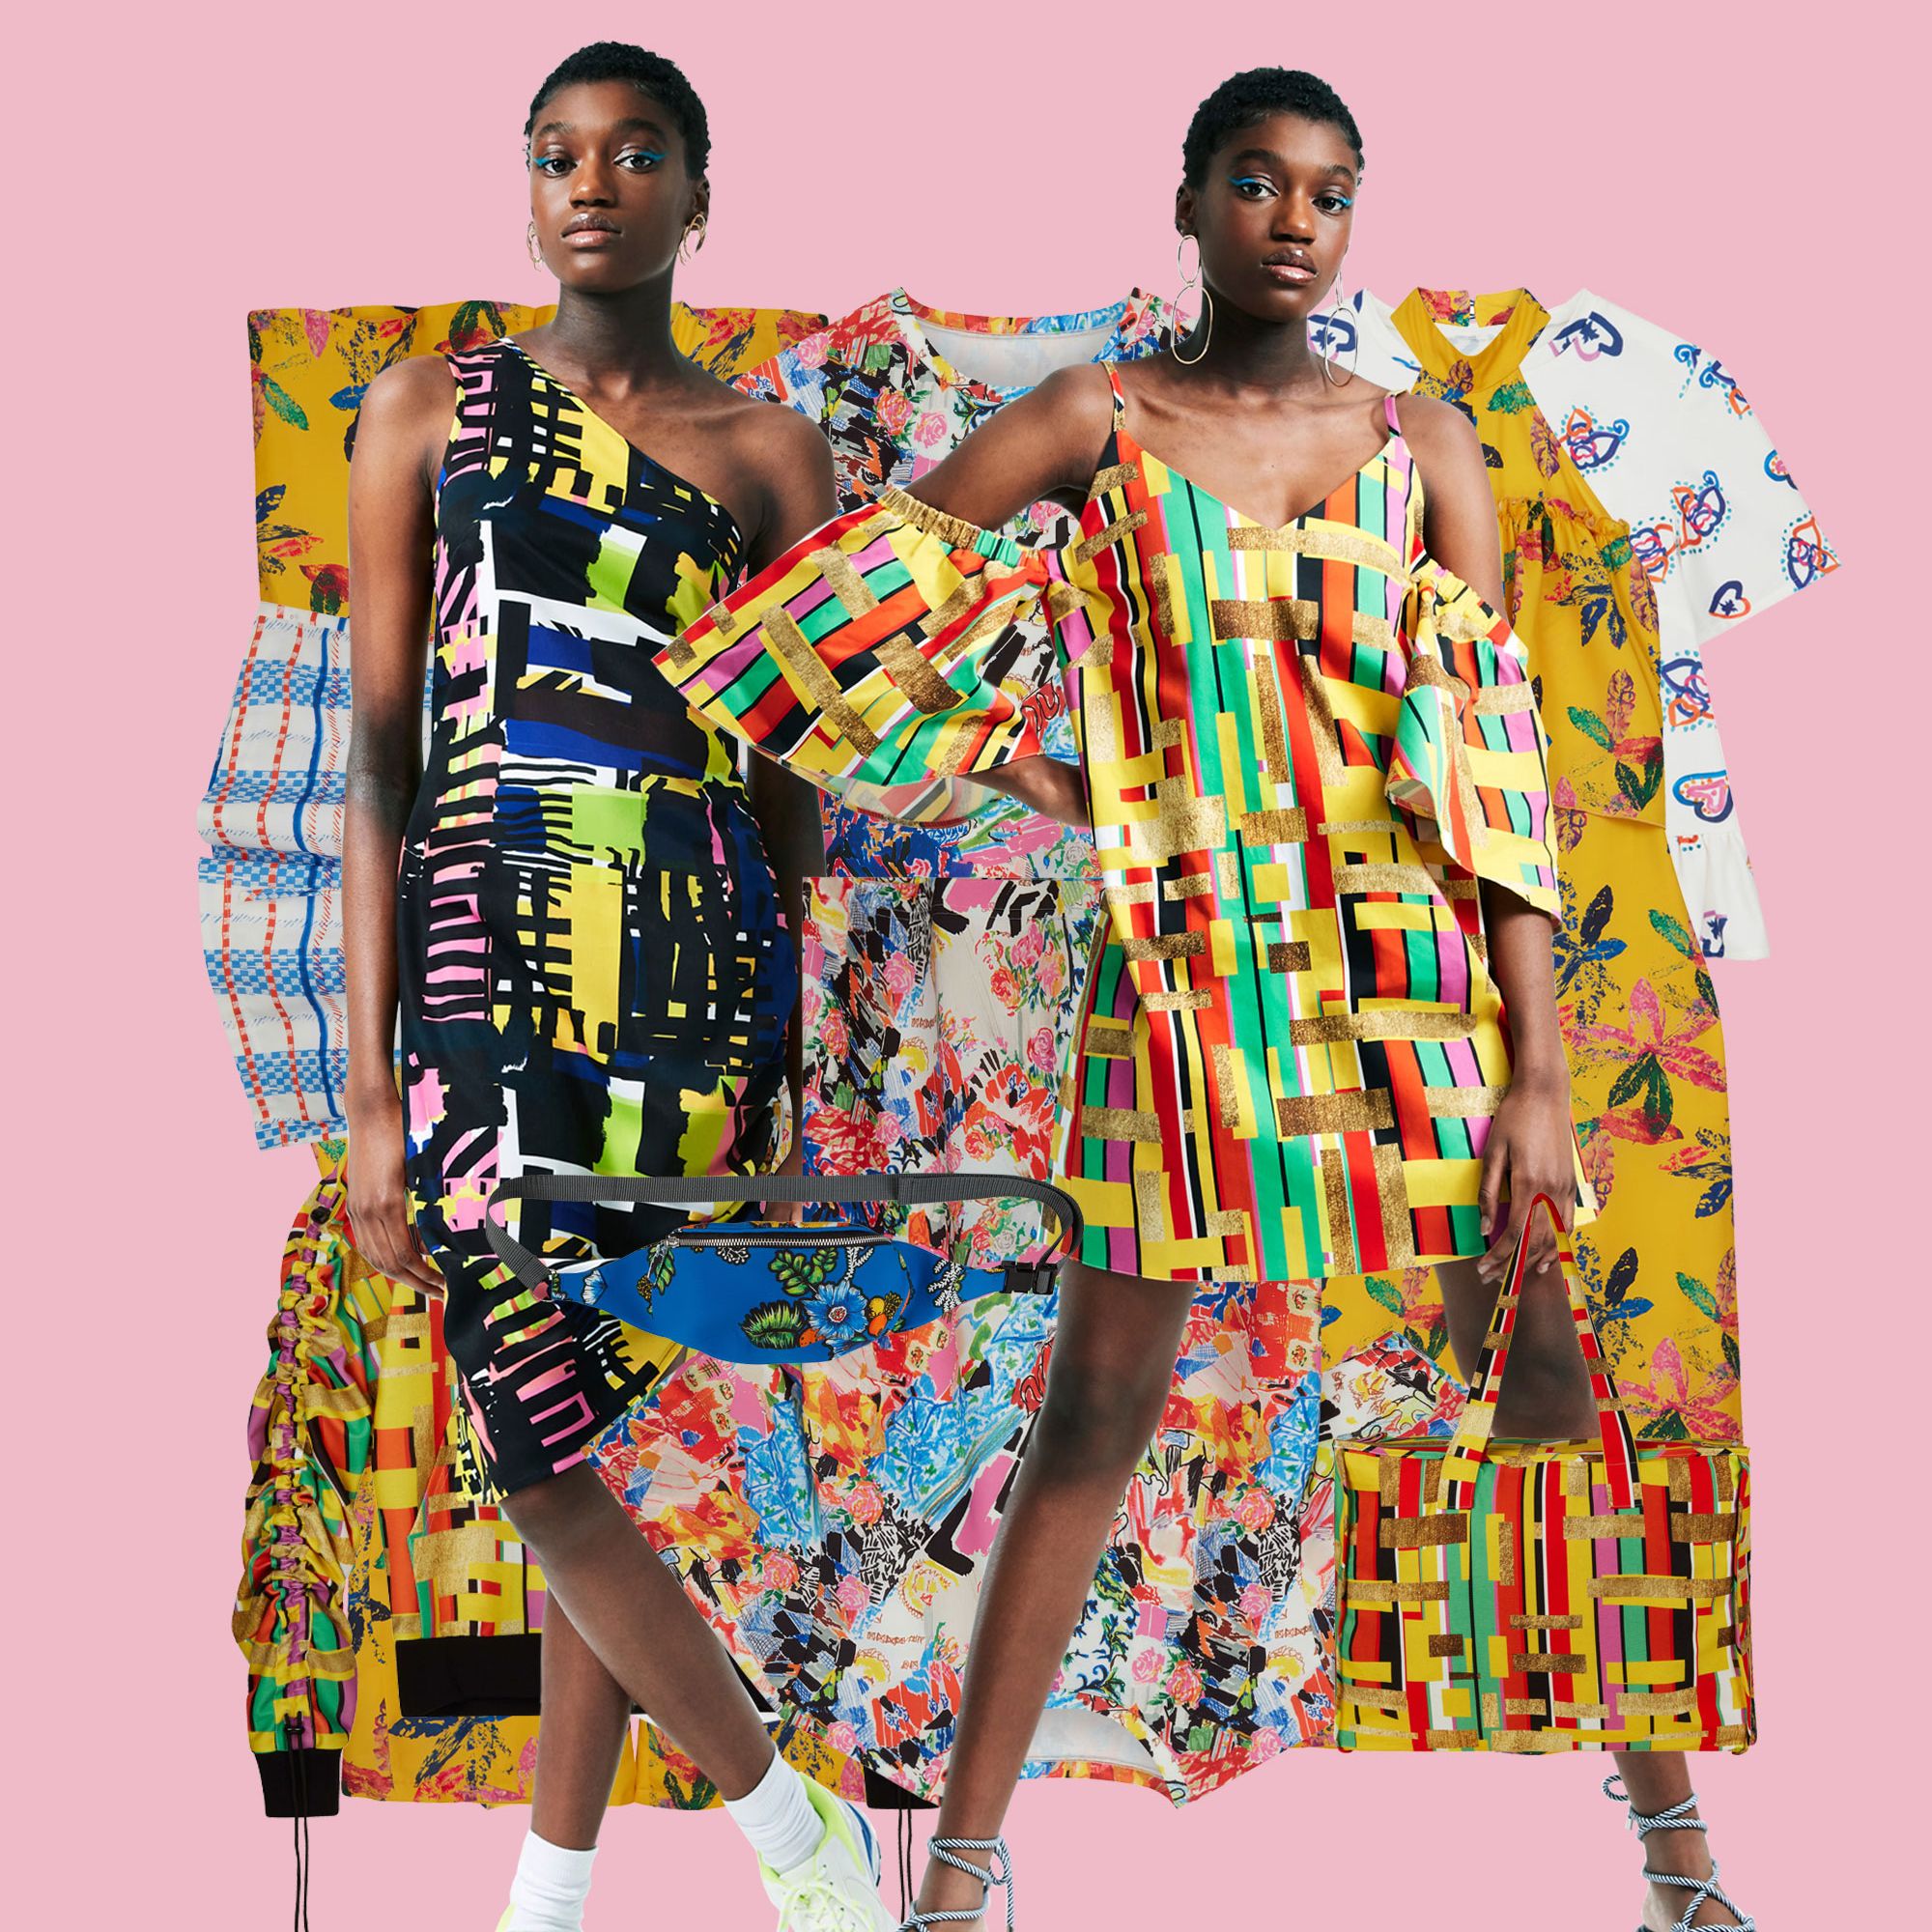 Asos Collaborates with Soko to design a Made in Kenya Collection